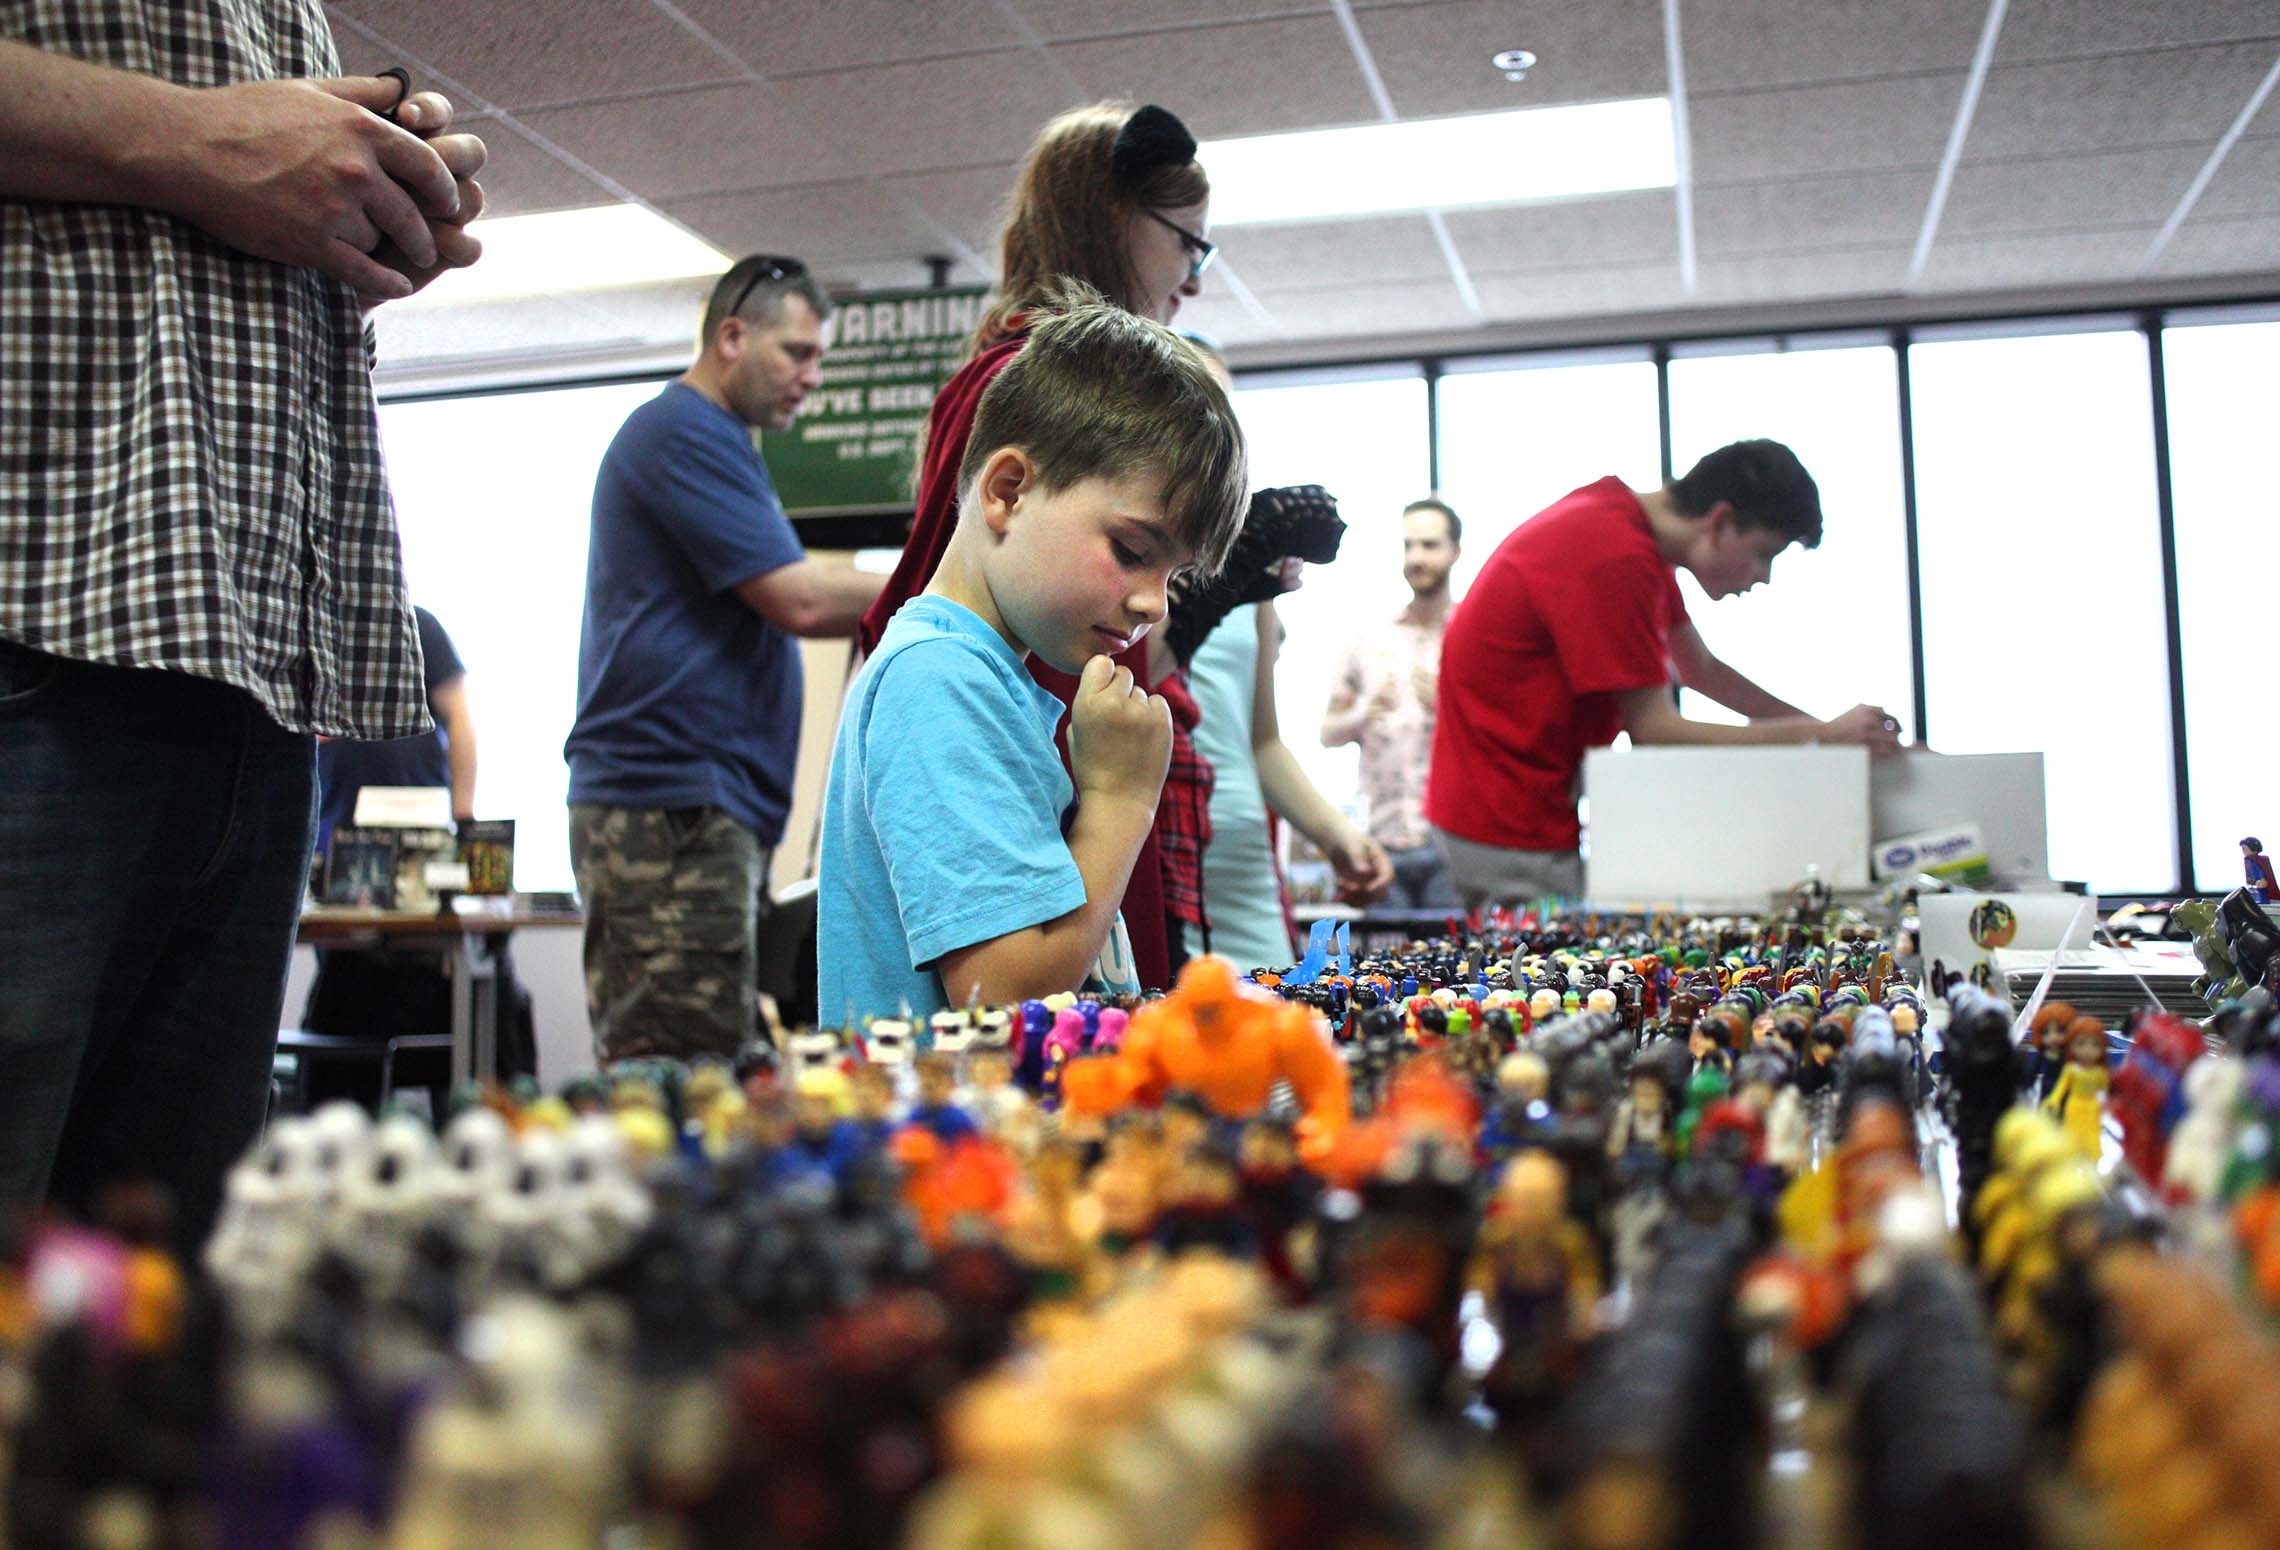  Harper Sexton, of Kankakee, makes his final lego figure choice Saturday during the 8th Annual Kankakee Fantasy Con at the Kankakee Public Library. Sexton spent a bit of time at the lego vendor booth picking the perfect figures to add to his collecti